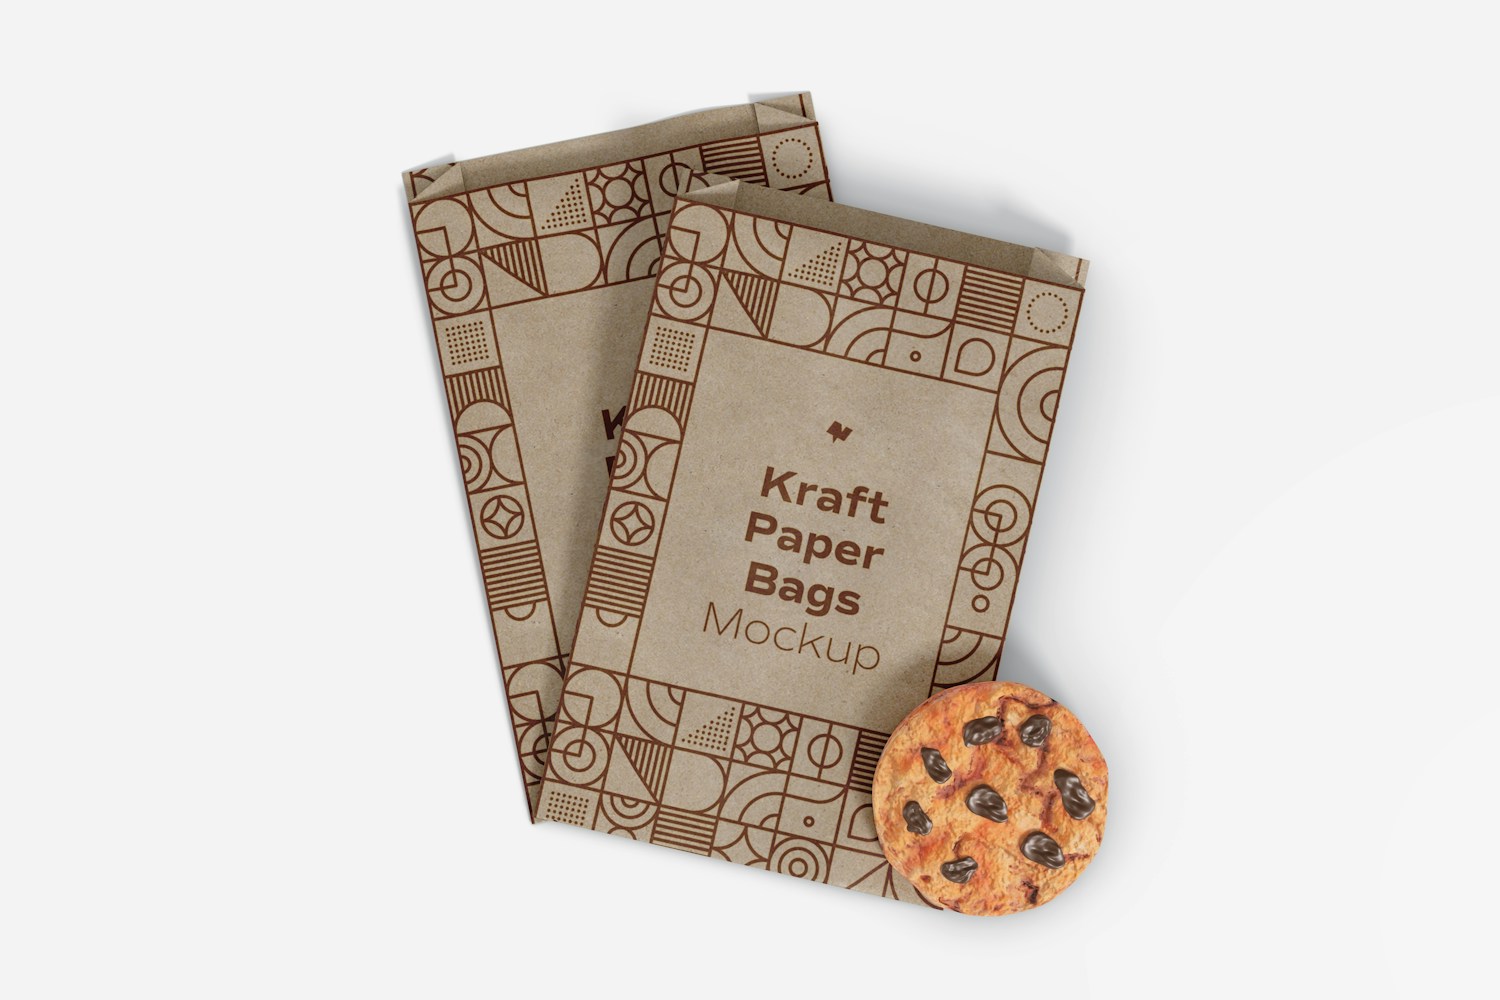 Kraft Paper Bags With Cookie Mockup, Top View